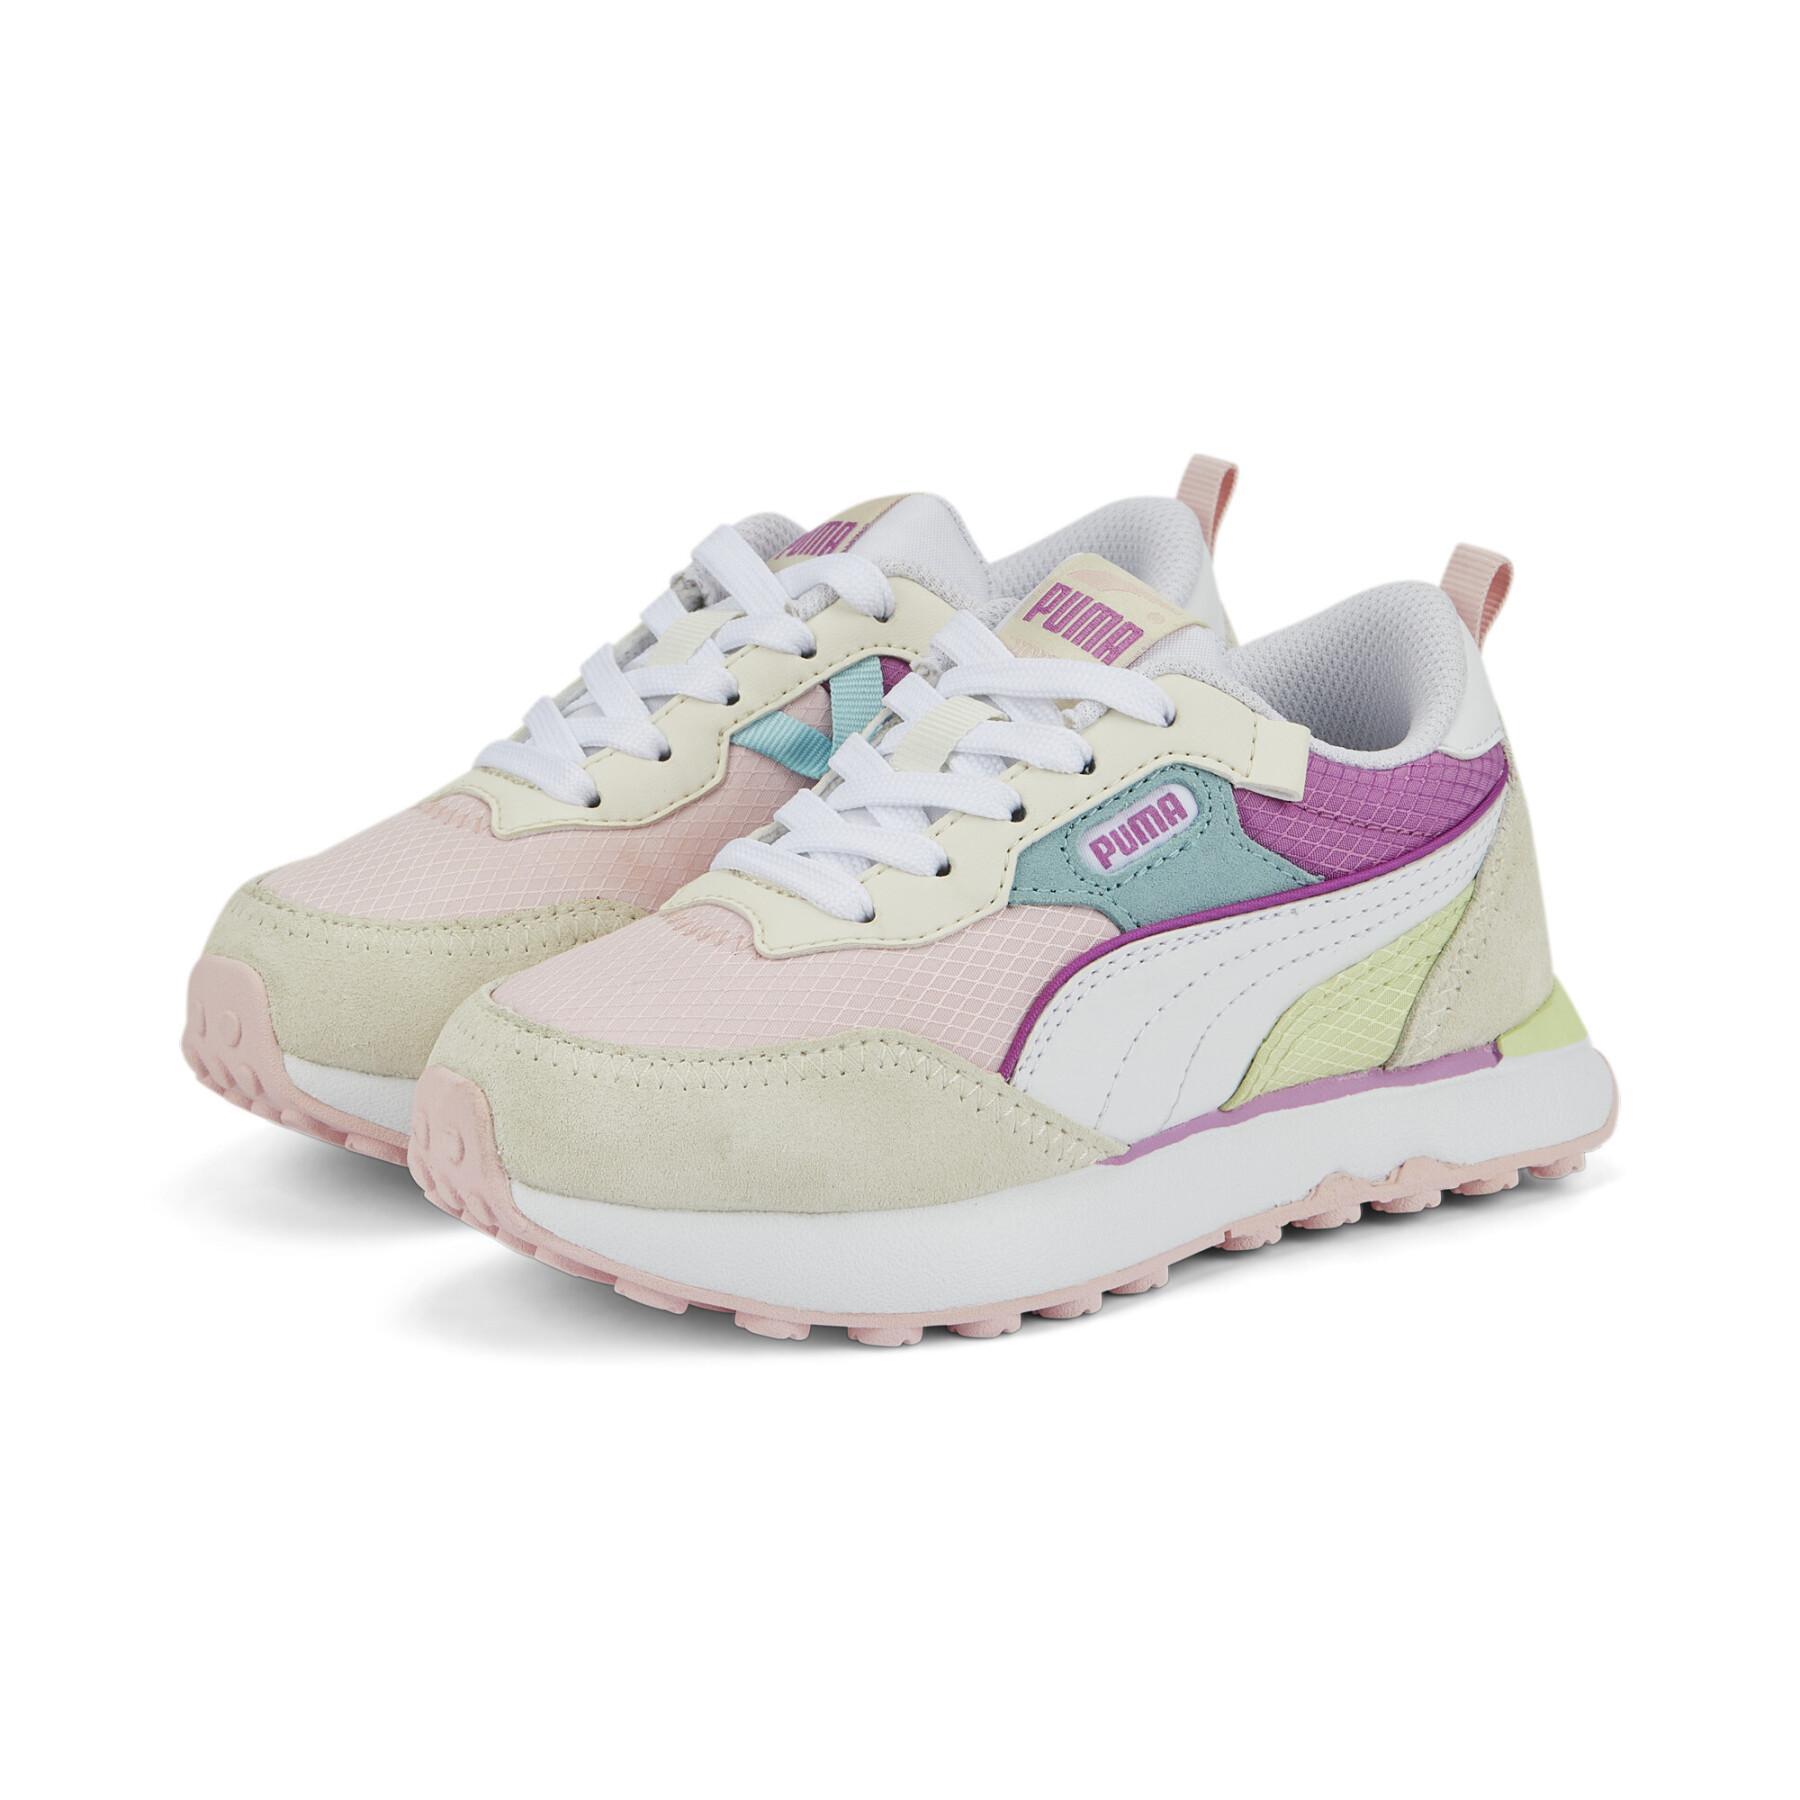 Girl sneakers Puma Rider Fv Ps